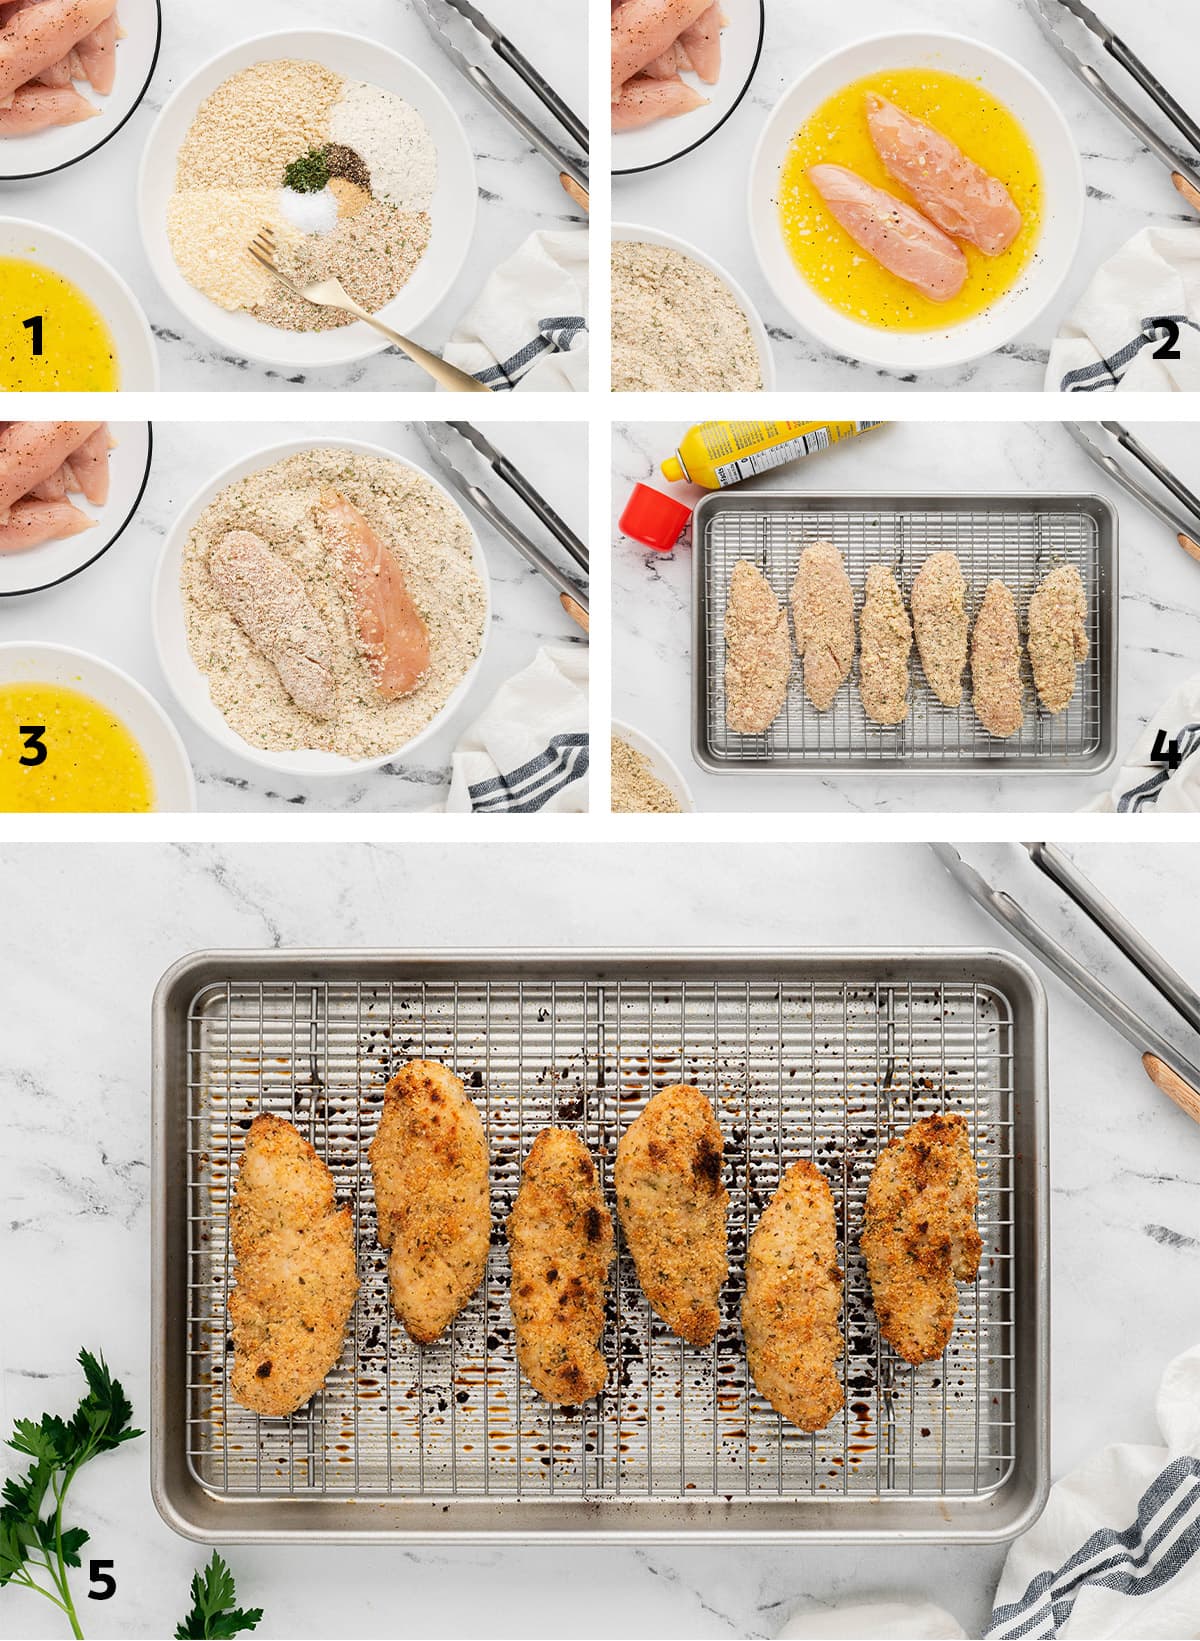 Collage of images showing how to make chicken strips.